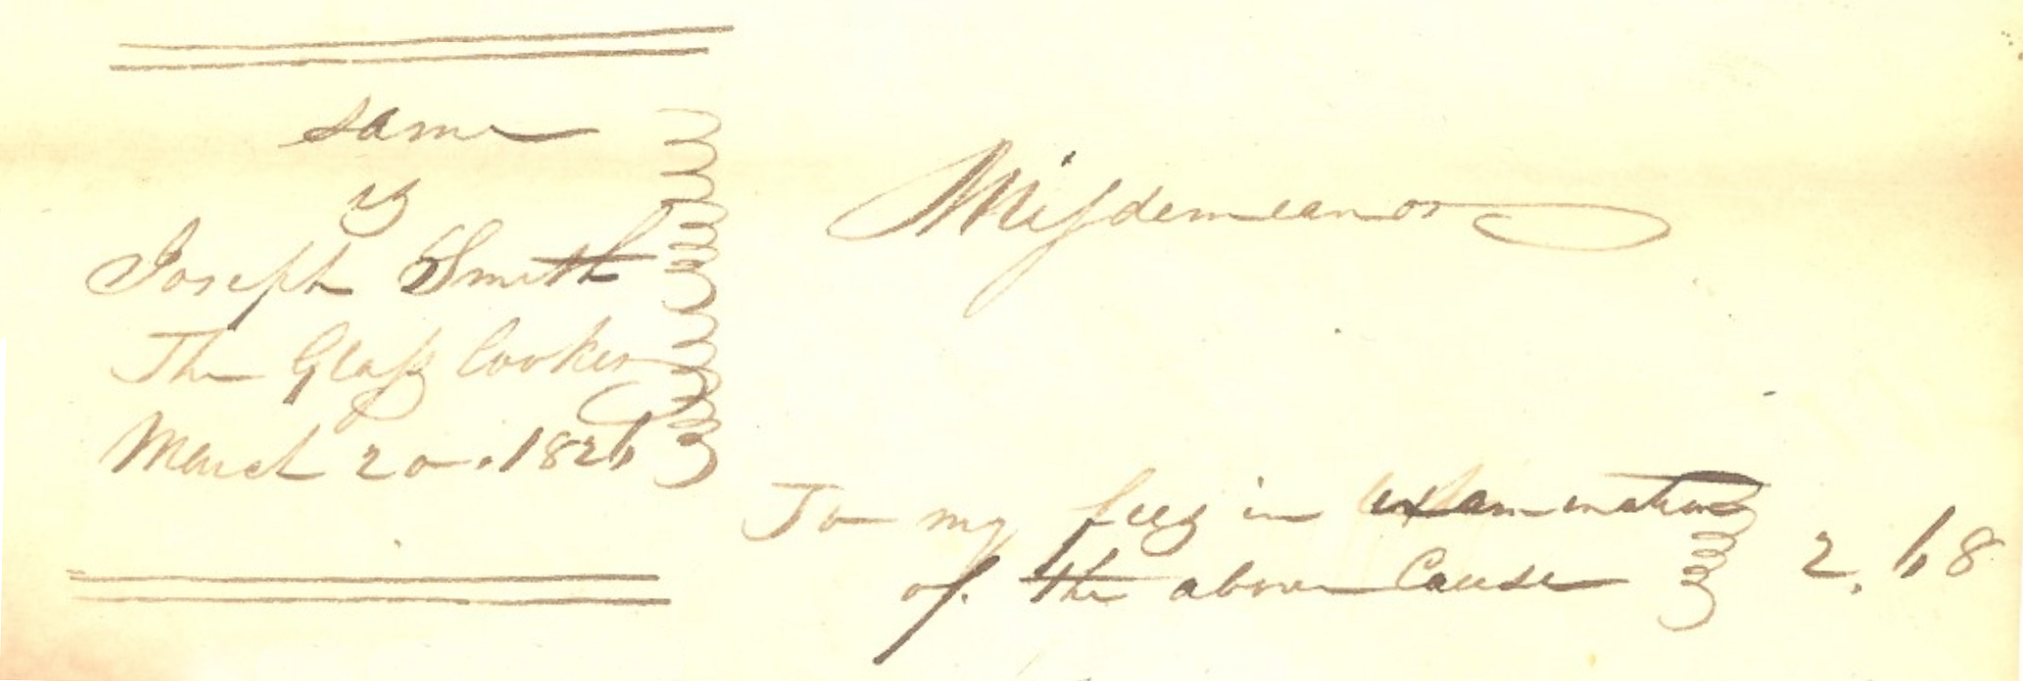 A yellowed document with brown handwriting for an examination fee bill by Judge Albert Neely for a misdemeanor against Joseph Smith The Glass Looker for a total of $2.68